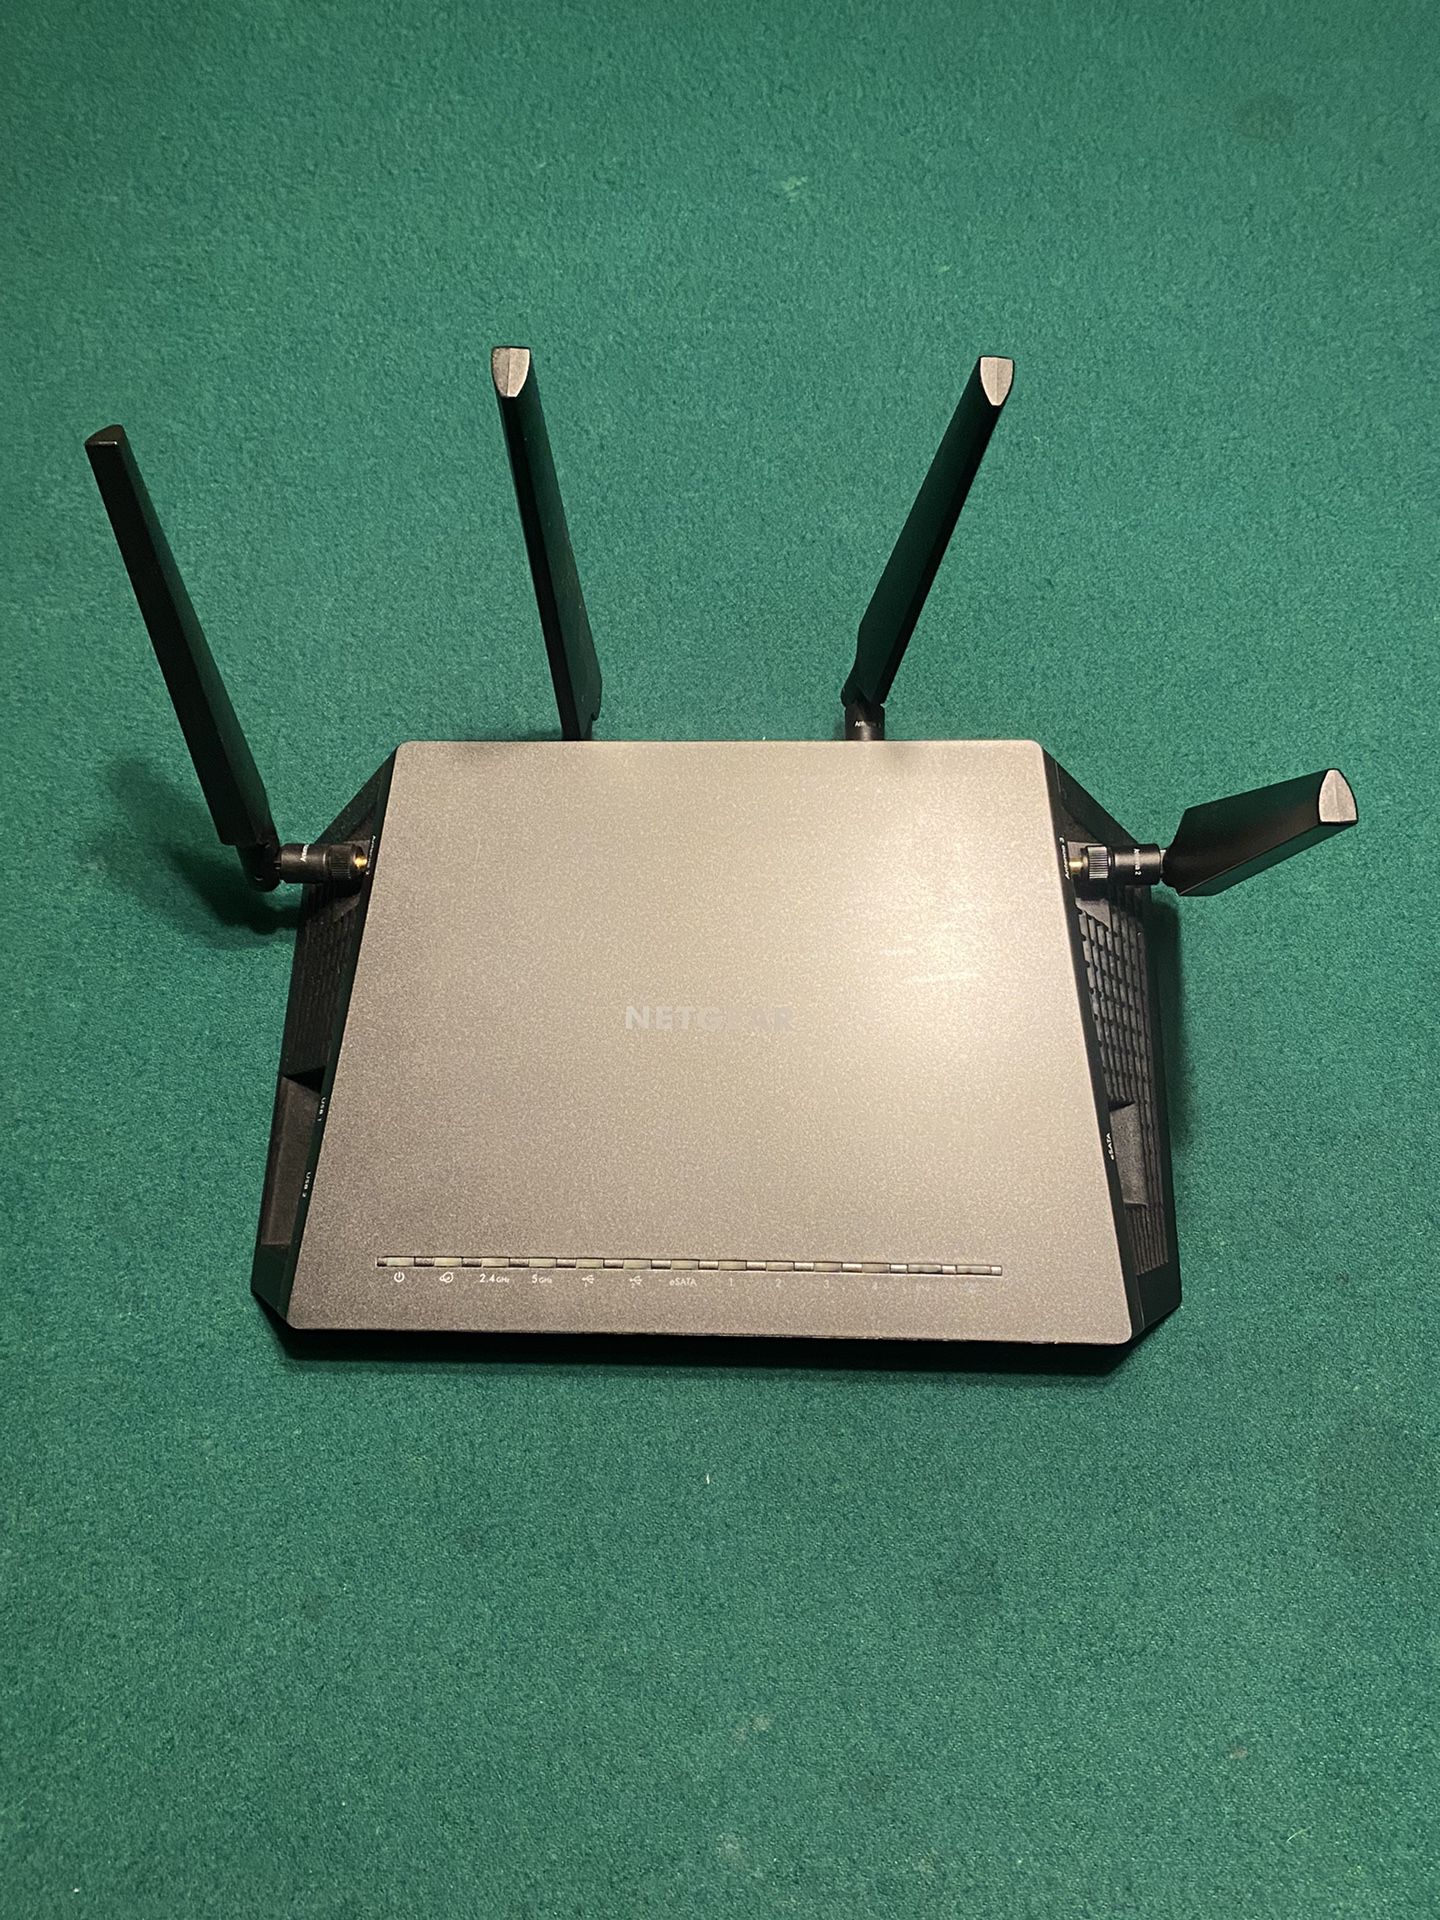 Netgear, Cable, Modem, and Router